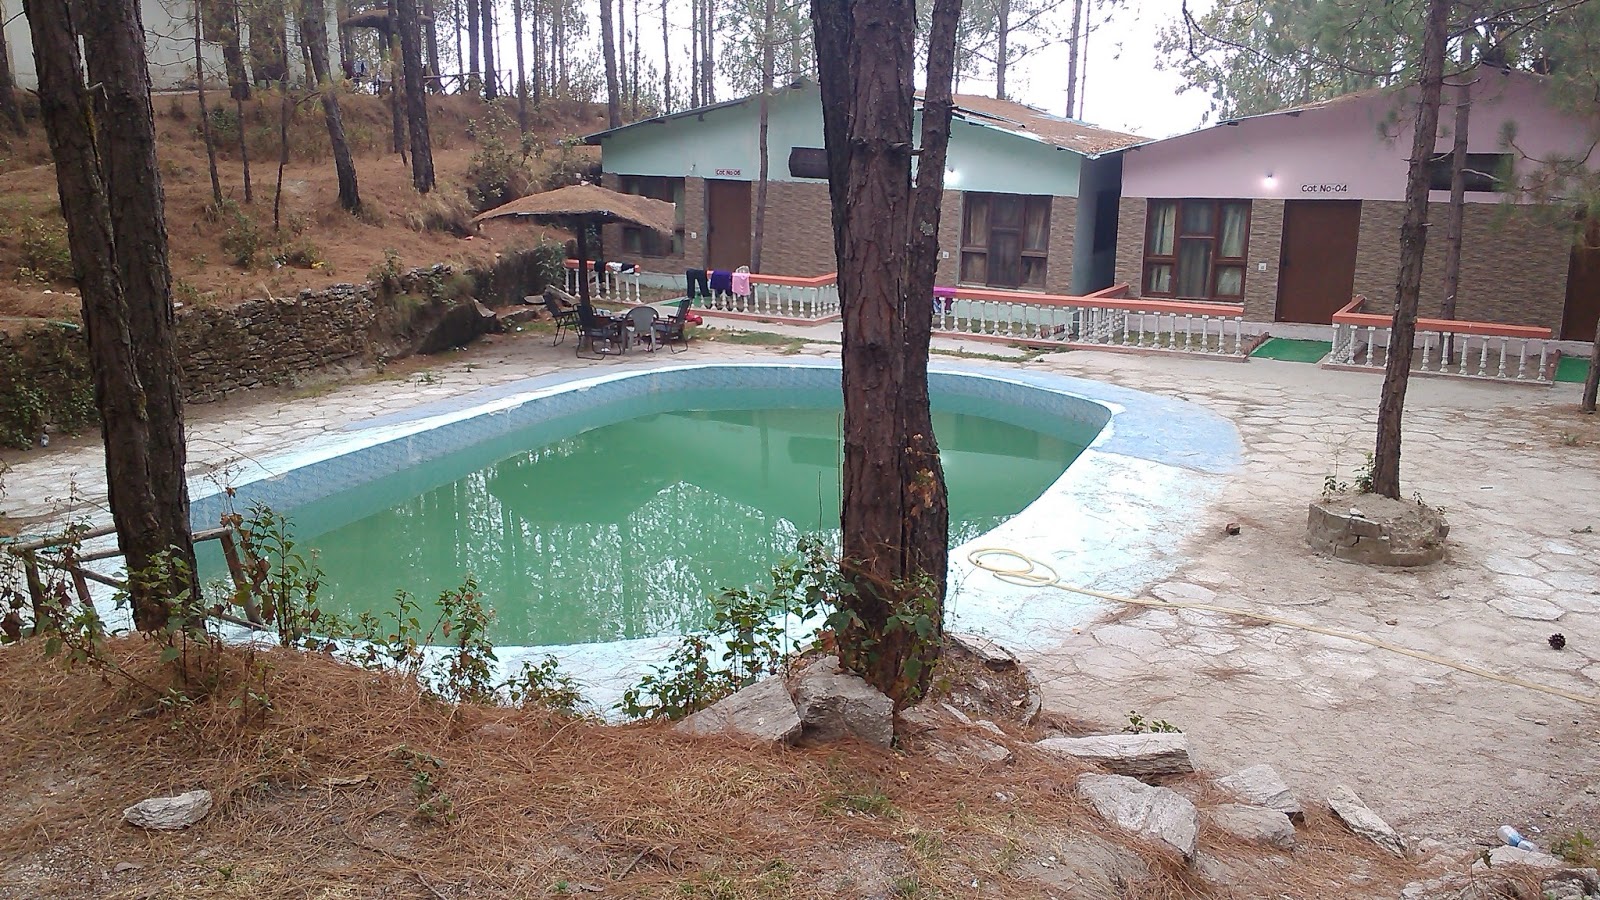 The swimming pool and cottages at the Retreat Anand Jungle Resort in Lansdowne